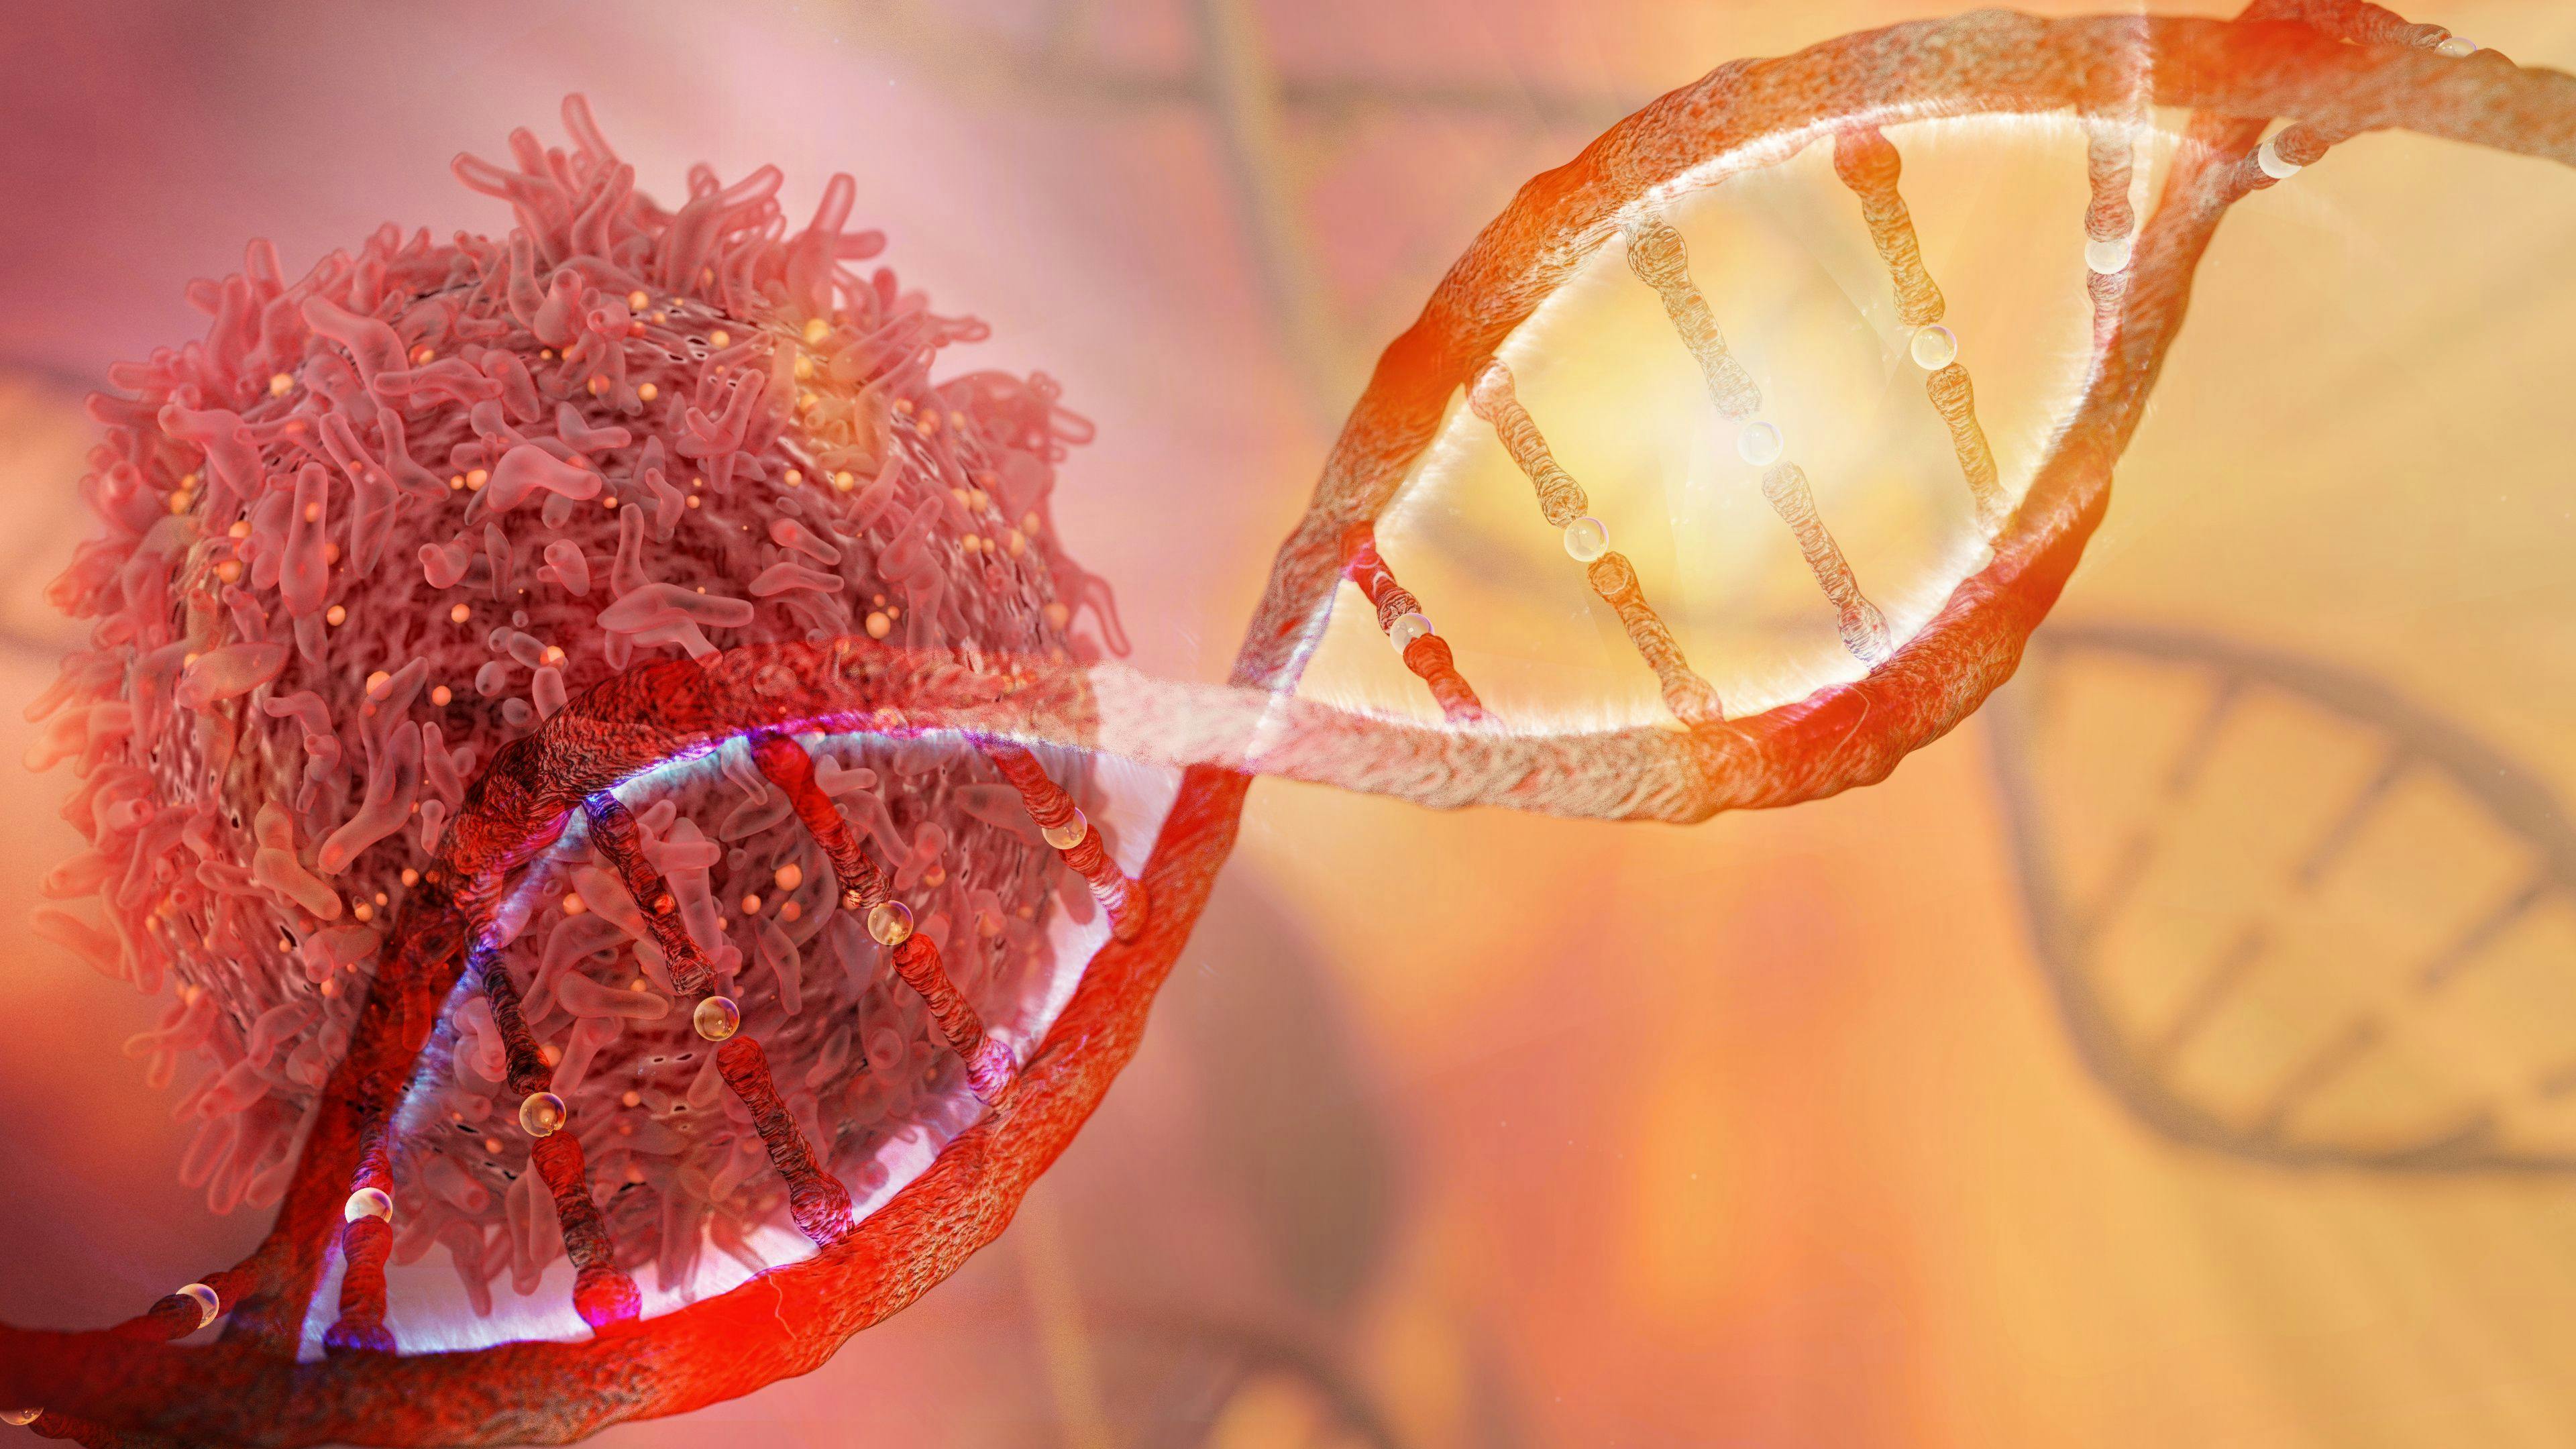 cancer cell and dna | Image credit: catalin - stock.adobe.com